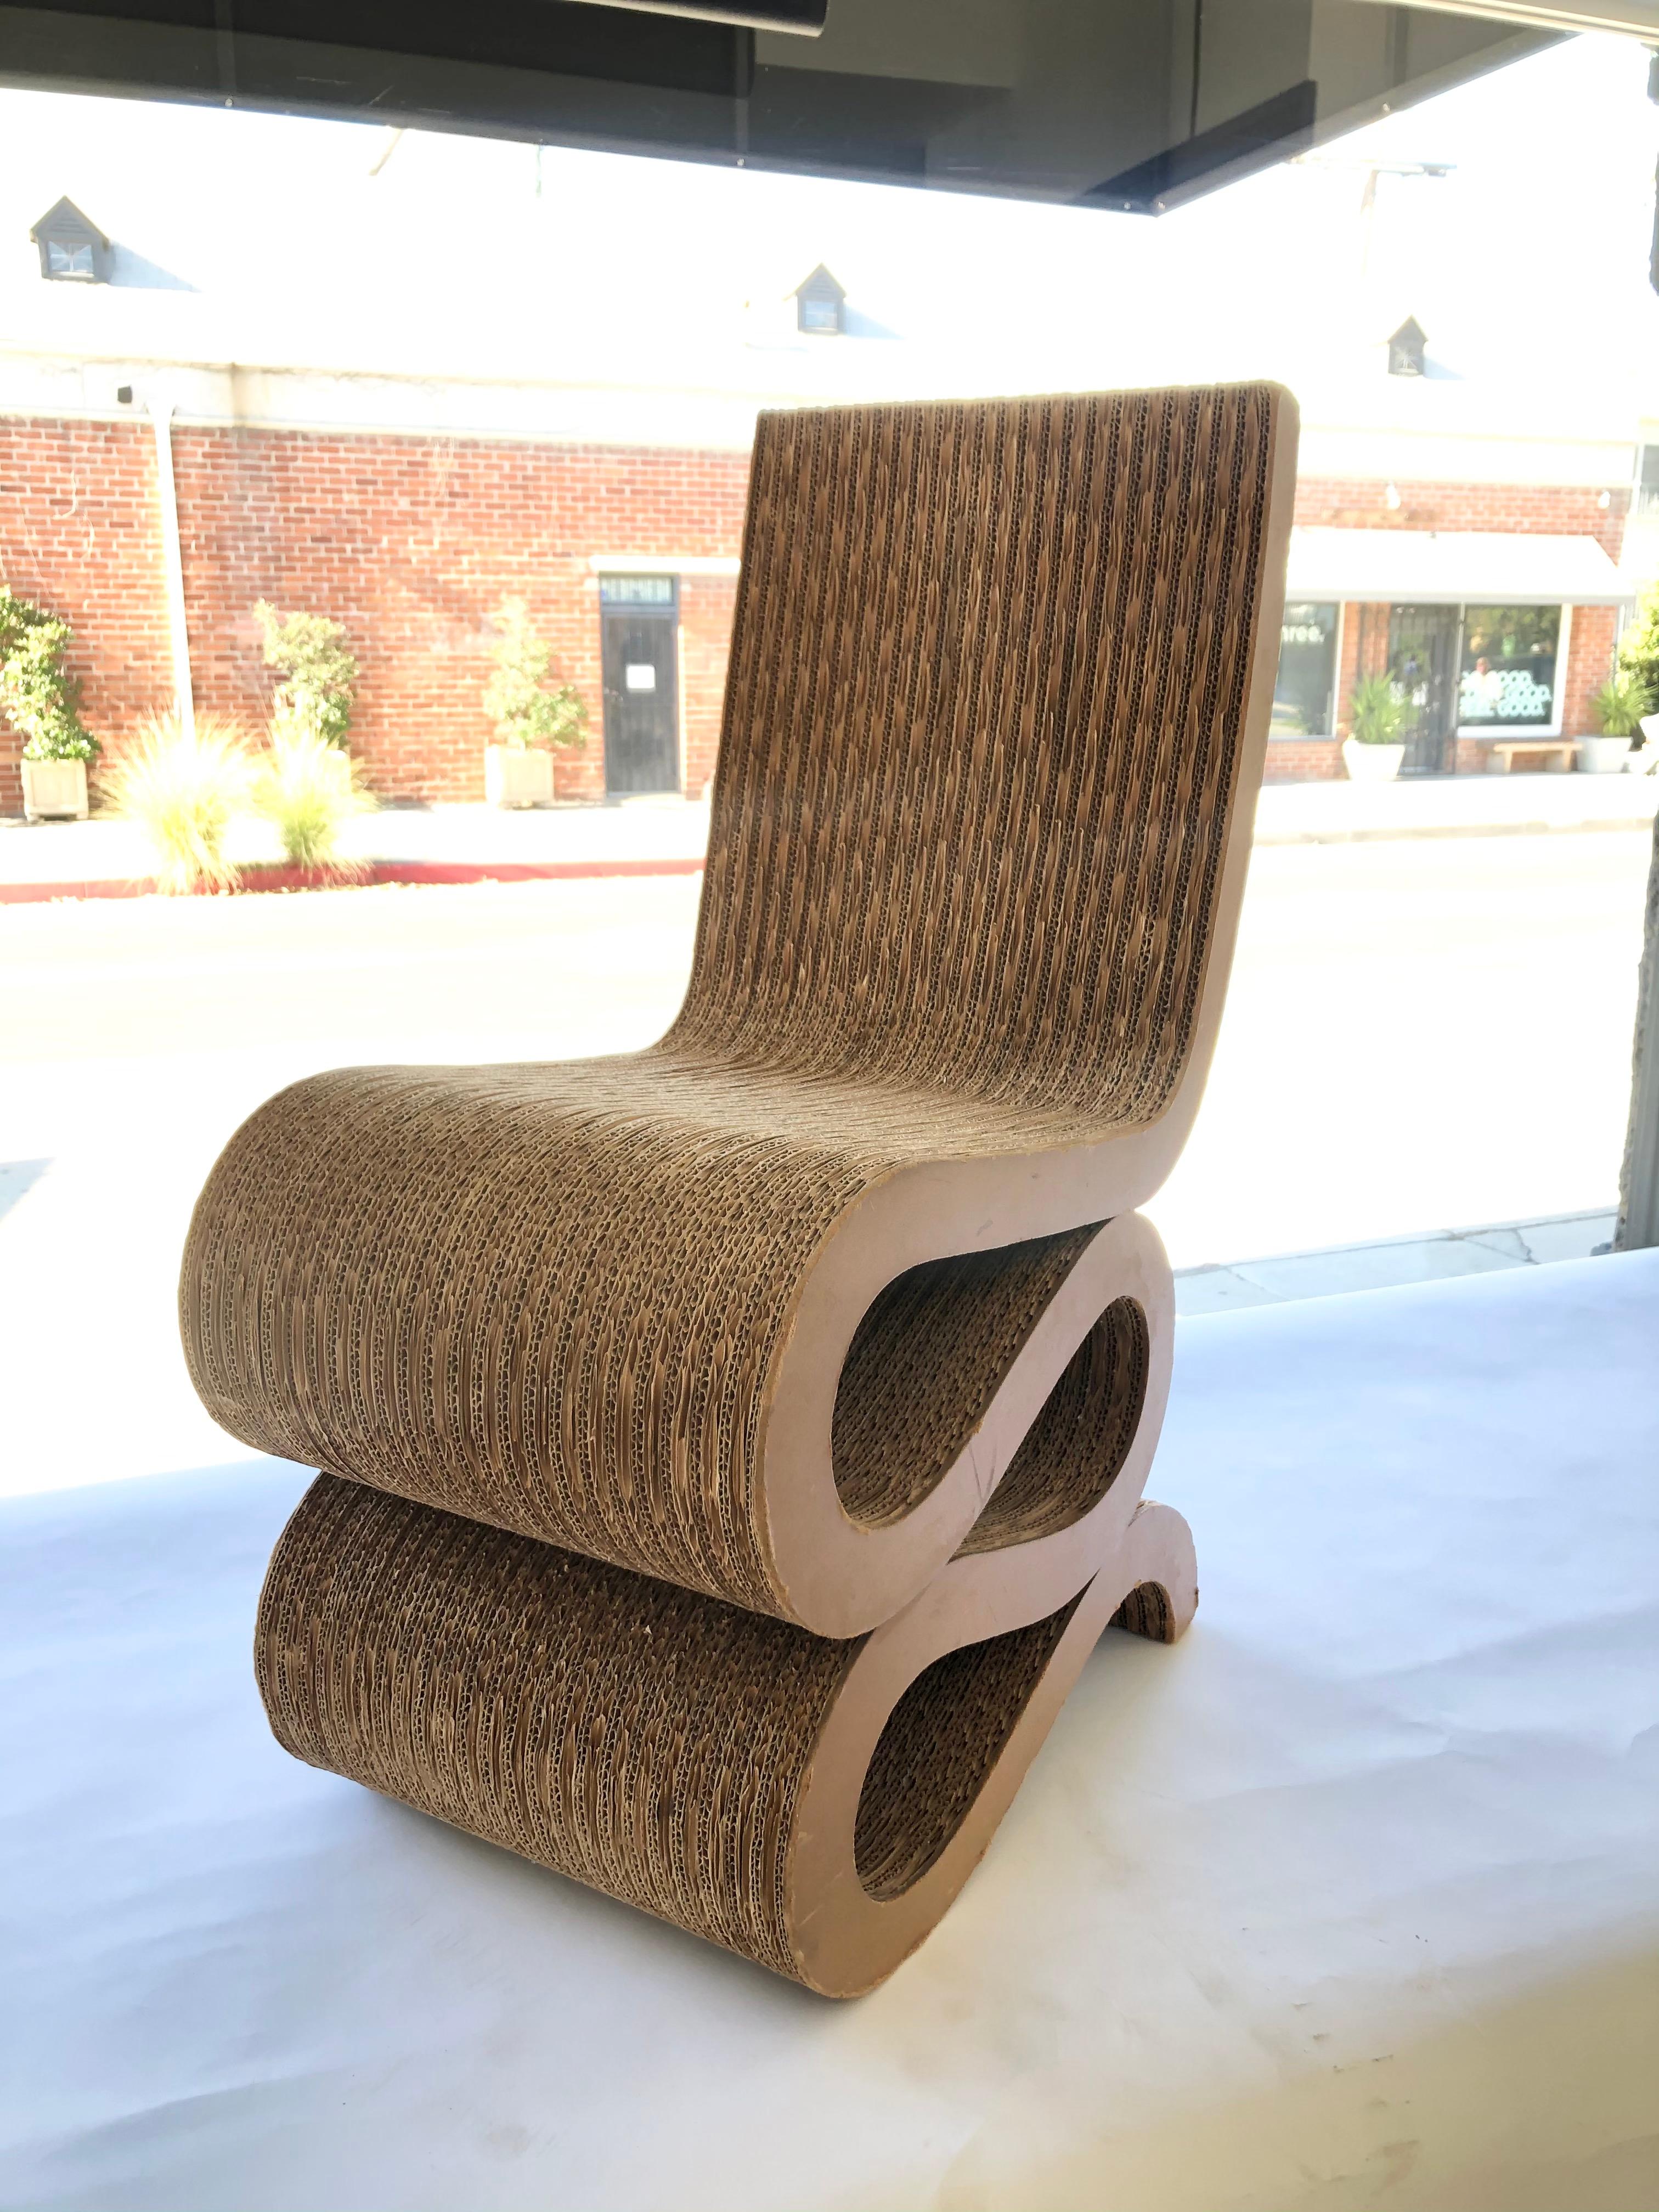 Iconic cardboard wiggle chair by Frank O. Gehry, 1972 in great condition.